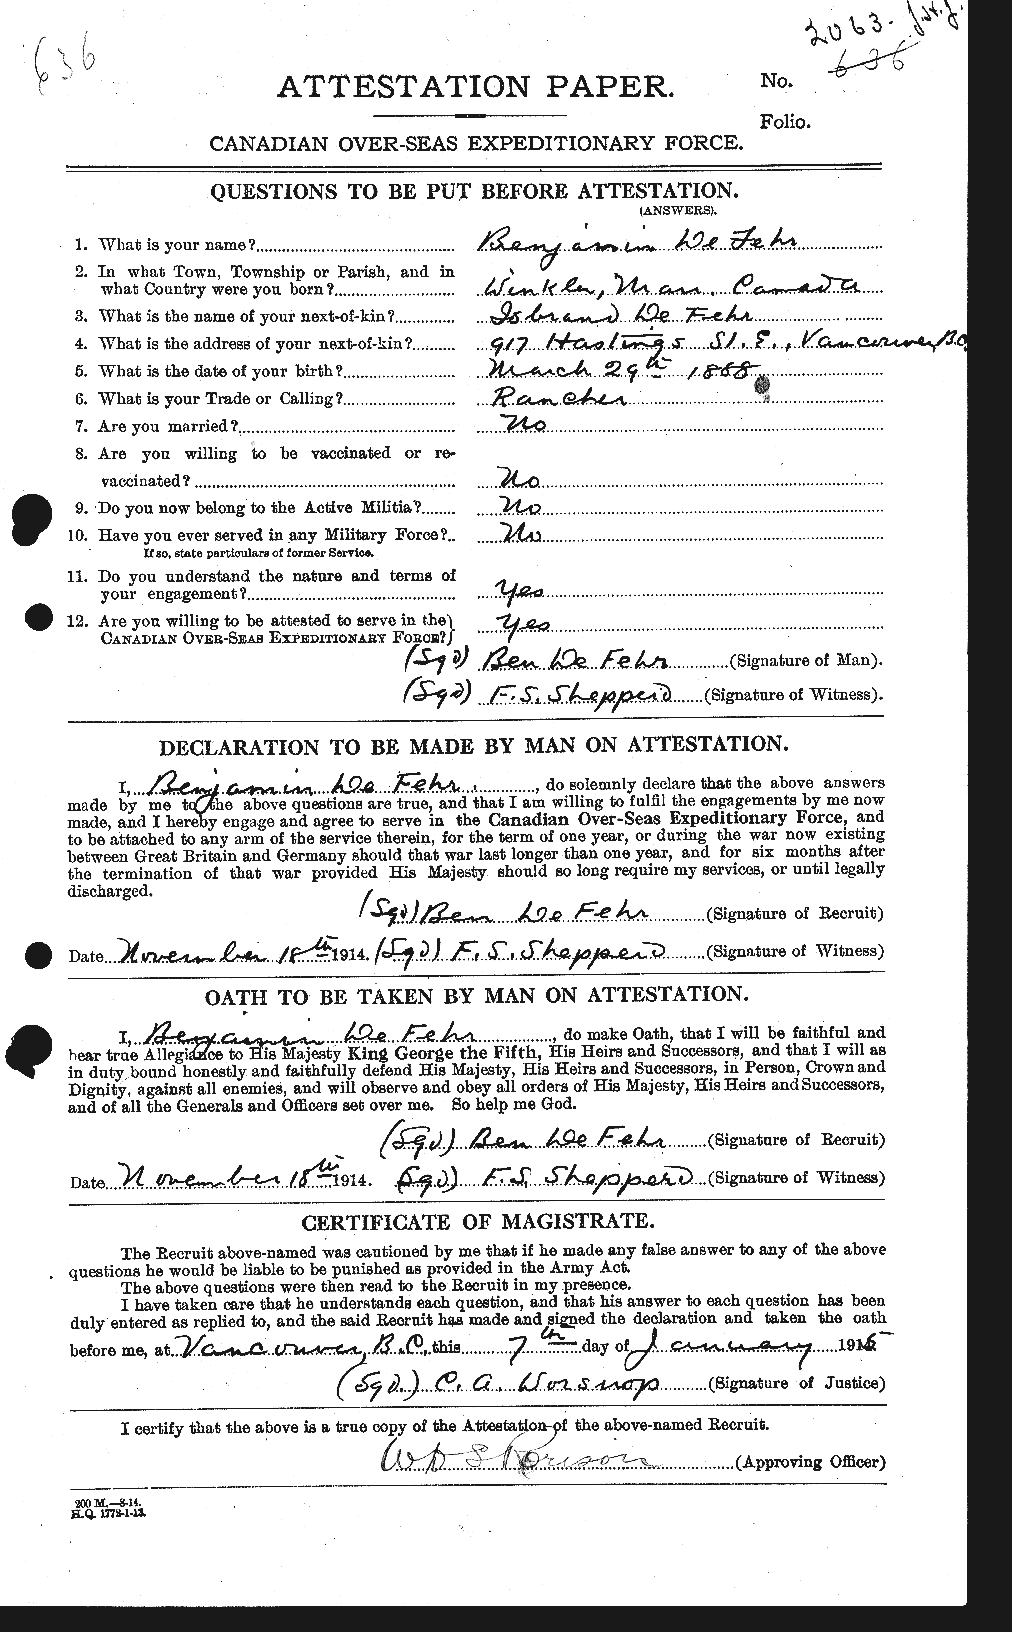 Personnel Records of the First World War - CEF 285840a